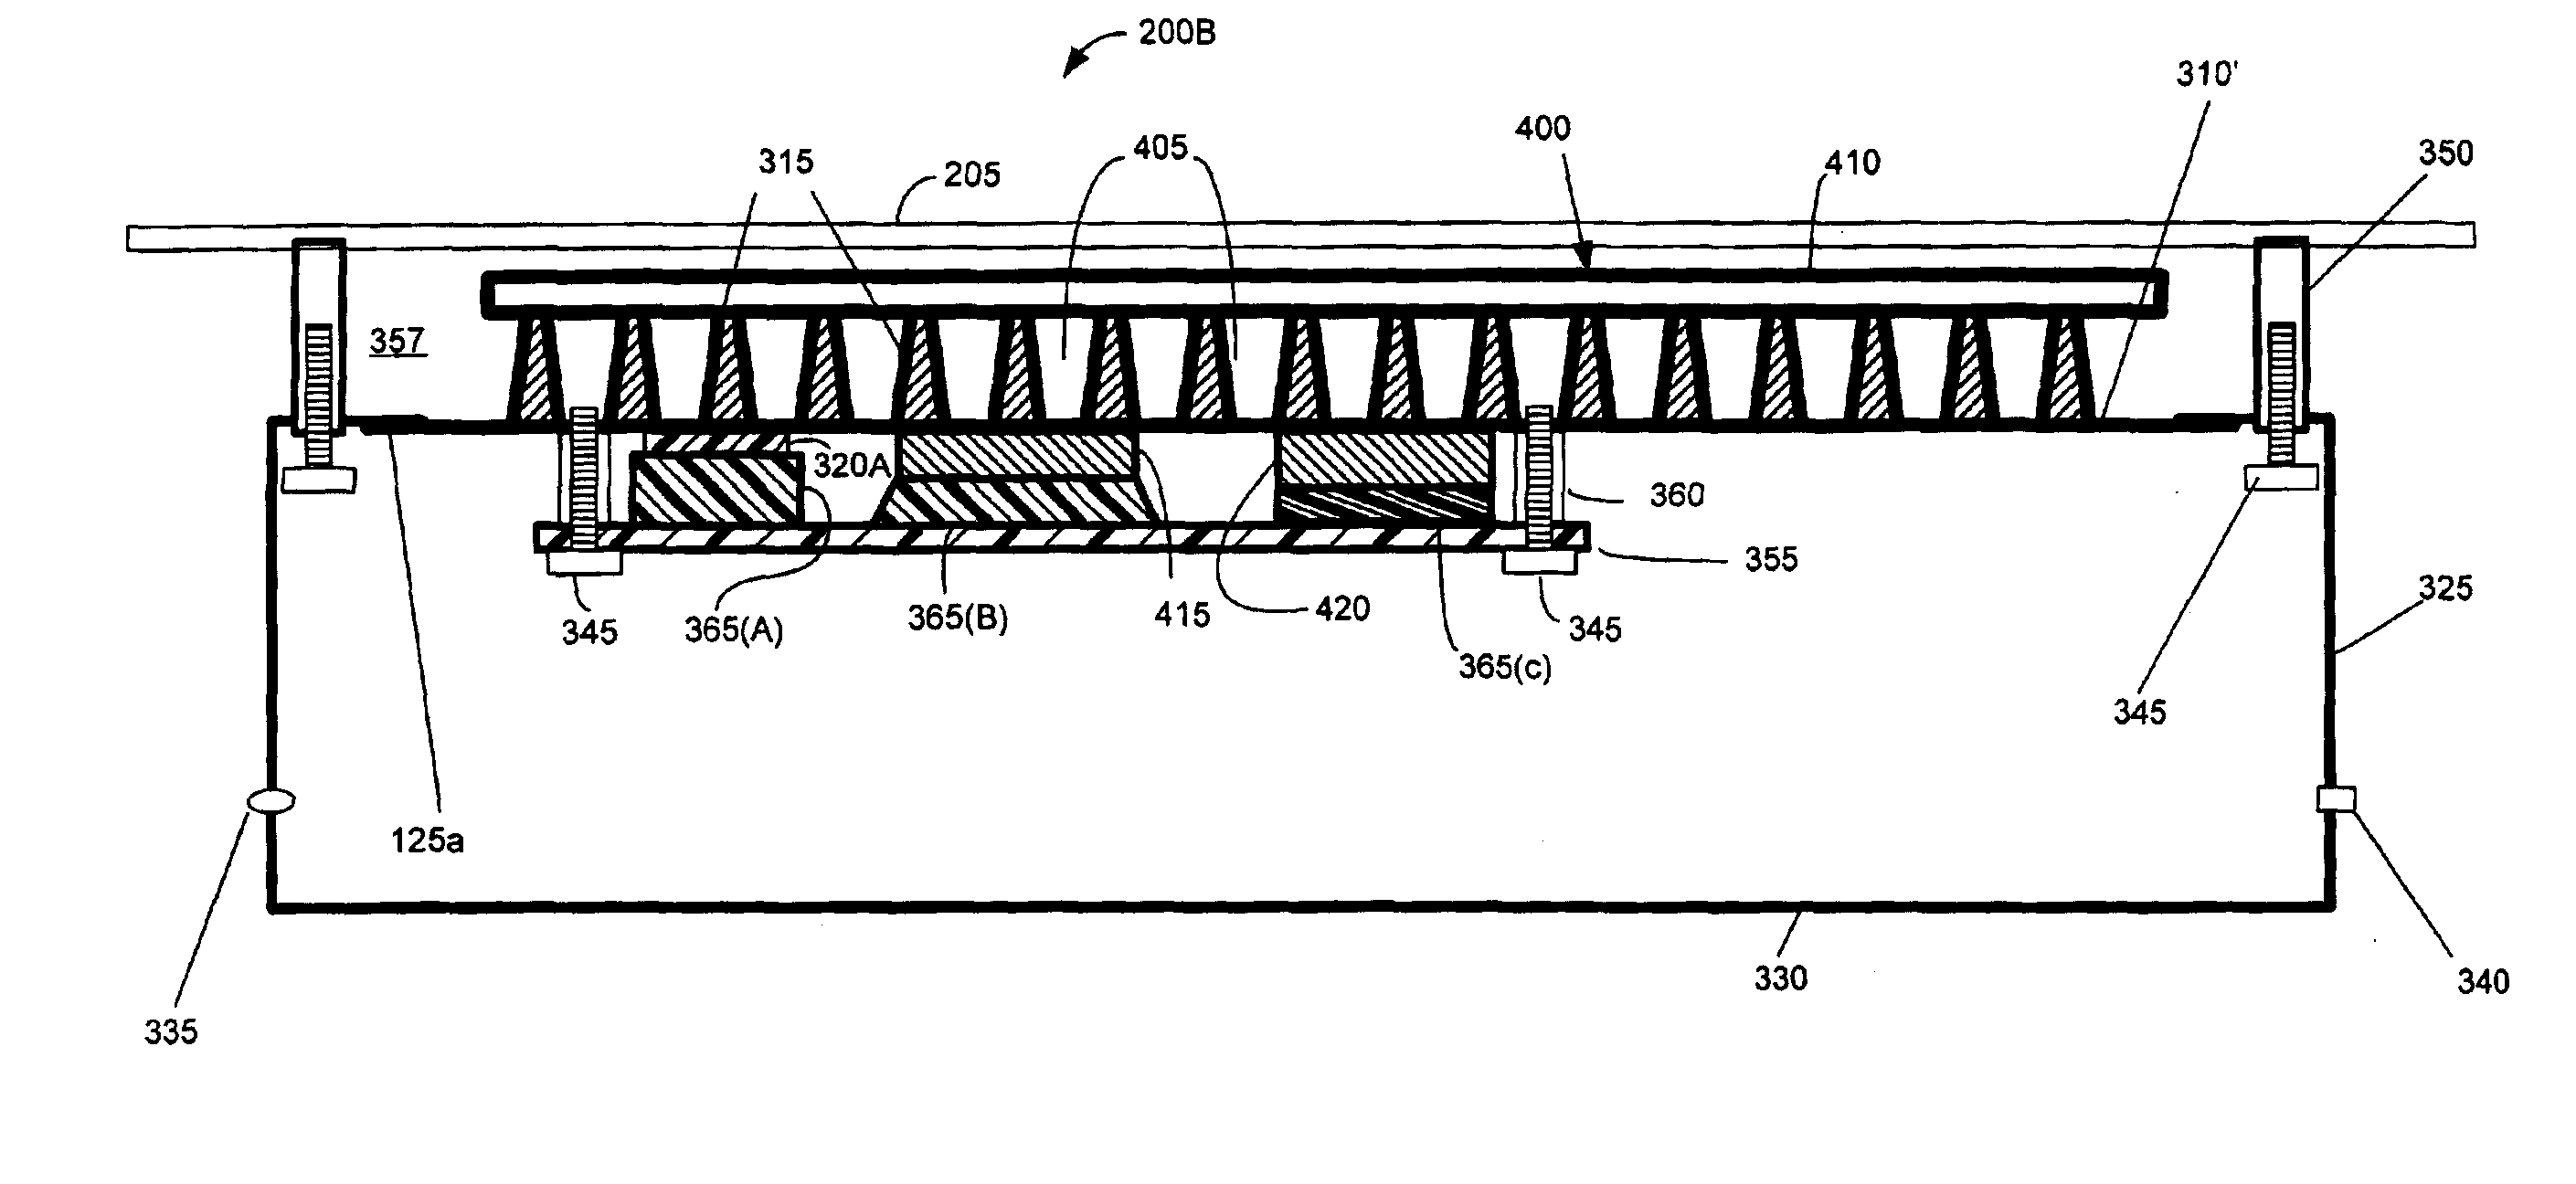 System and method for removing heat from a subscriber optical interface